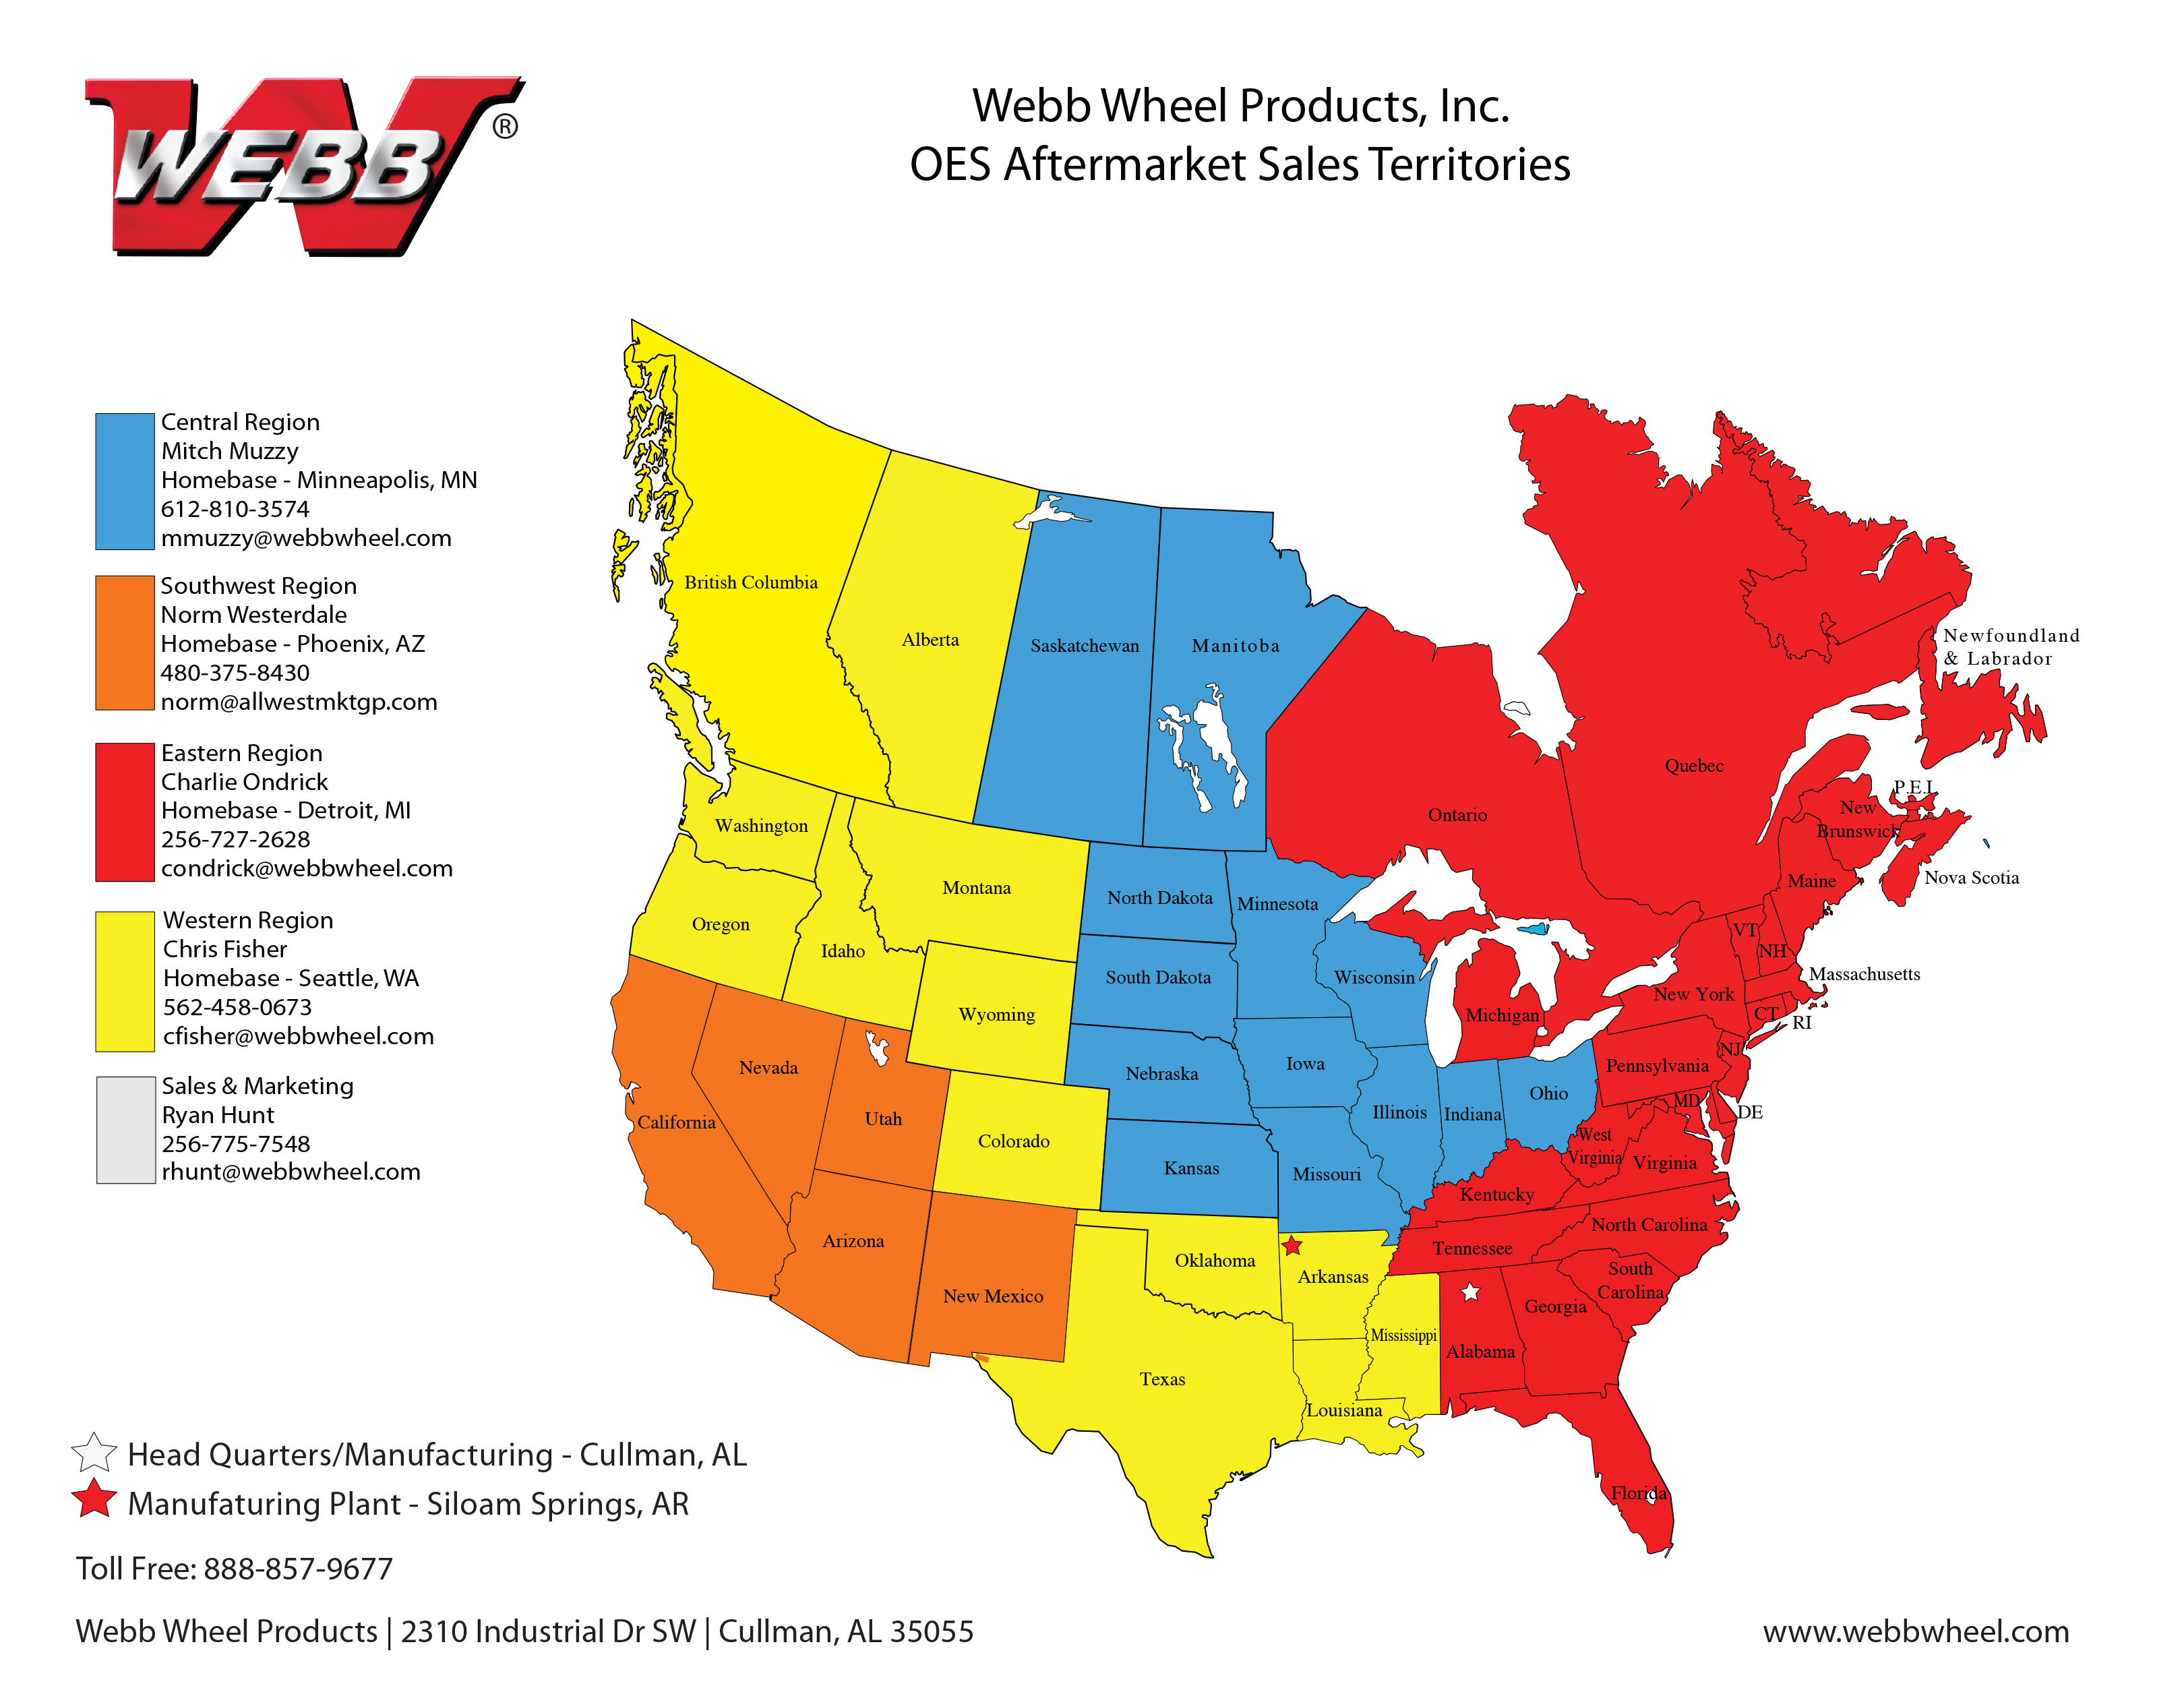 oes aftermarket map